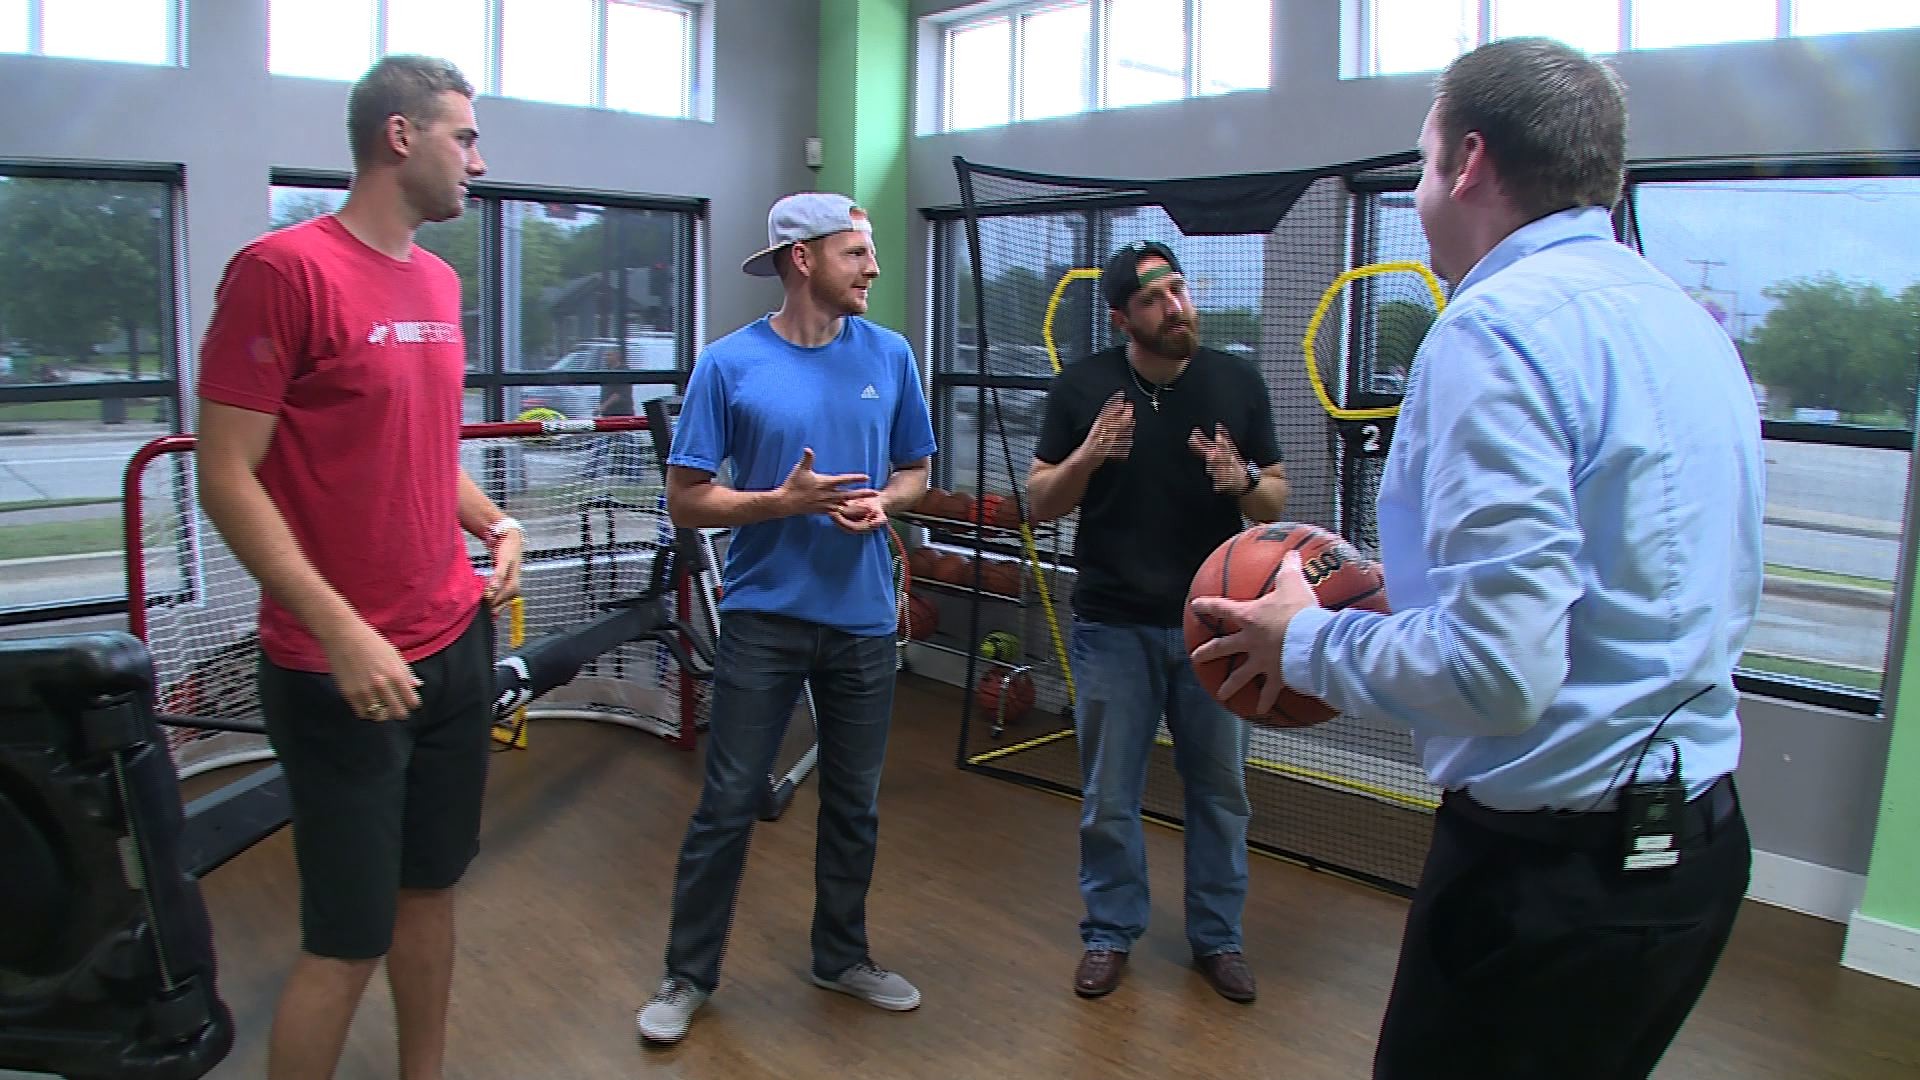 1920x1080 Shooting baskets with Dude Perfect, Frisco's own YouTube superstars |  GuideLive